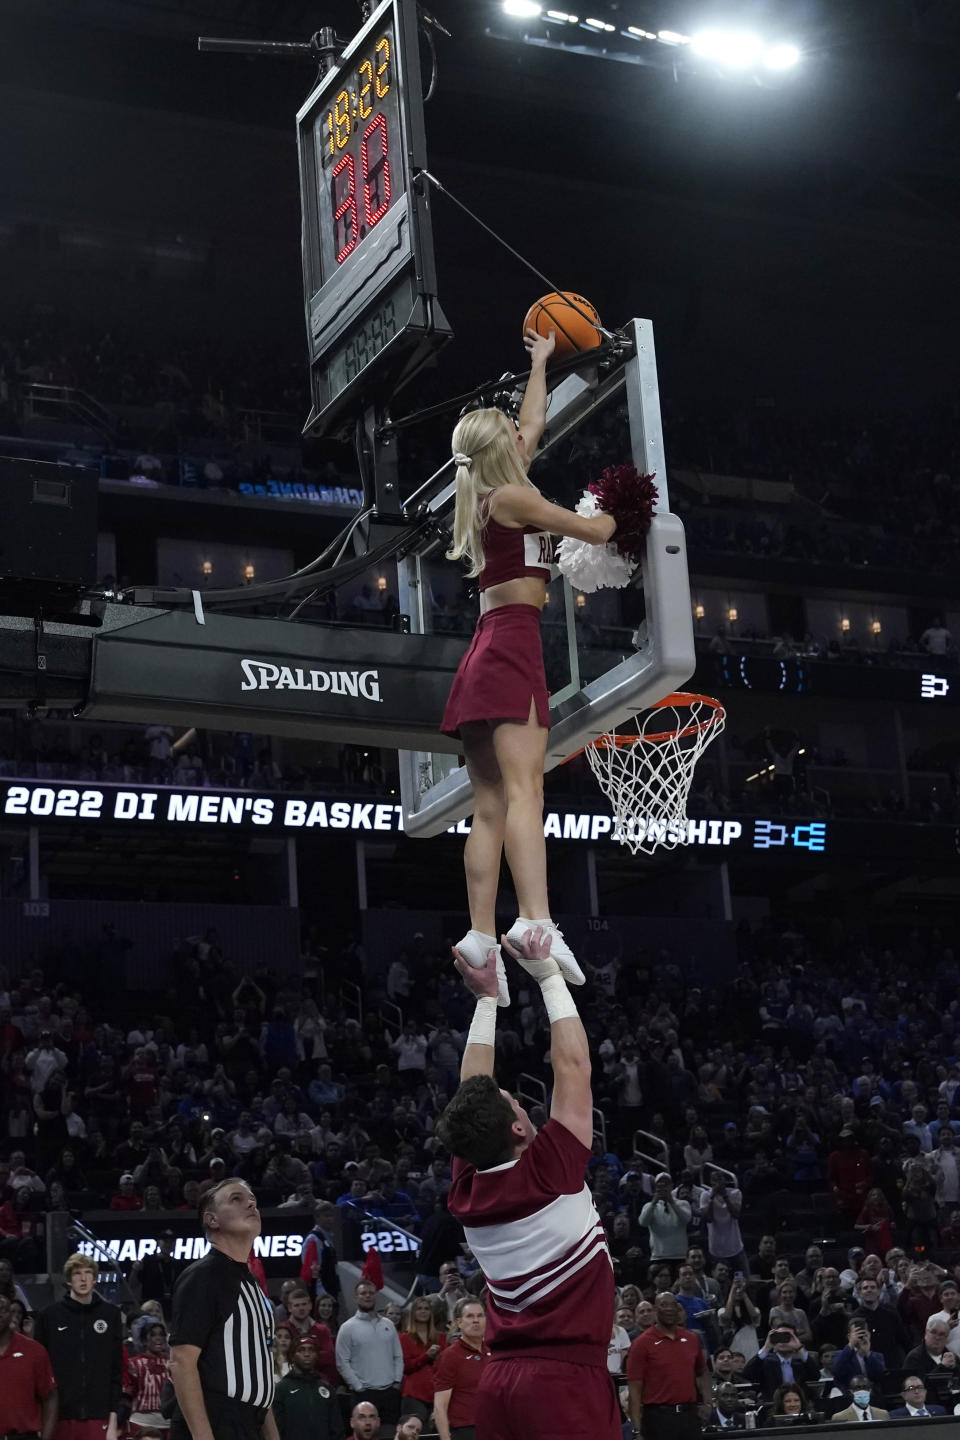 An Arkansas cheerleader reaches for a ball stuck on the top of the glass during the second half of a college basketball game between Duke and Arkansas in the Elite 8 round of the NCAA men's tournament in San Francisco, Saturday, March 26, 2022. (AP Photo/Marcio Jose Sanchez)